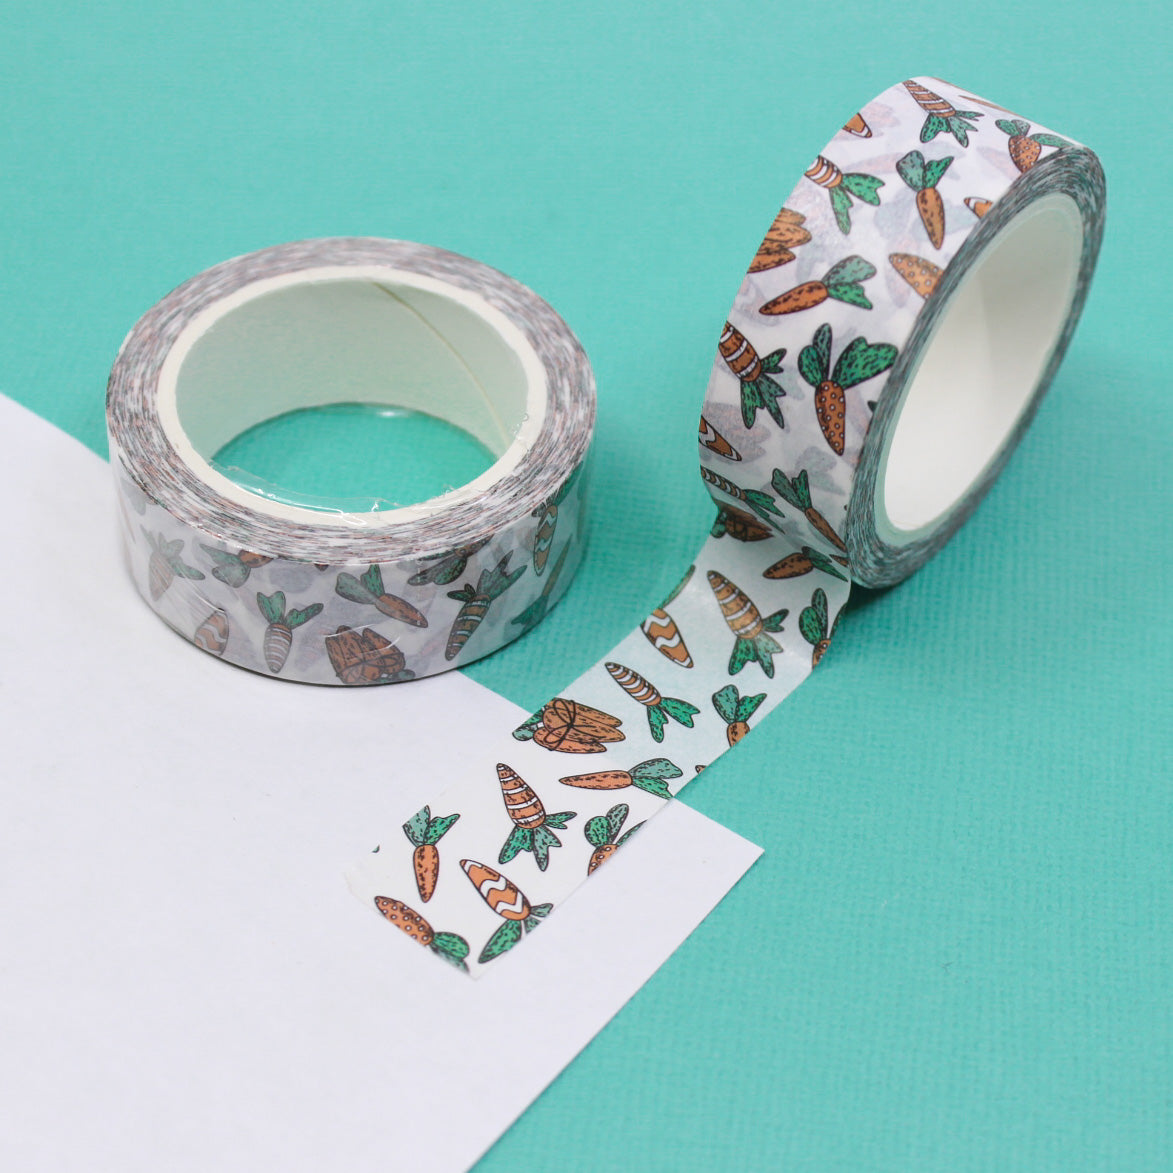 This festive washi tape features an adorable carrot pattern, perfect for Easter crafts and springtime projects. This tape is sold at BBB Supplies Craft Shop.